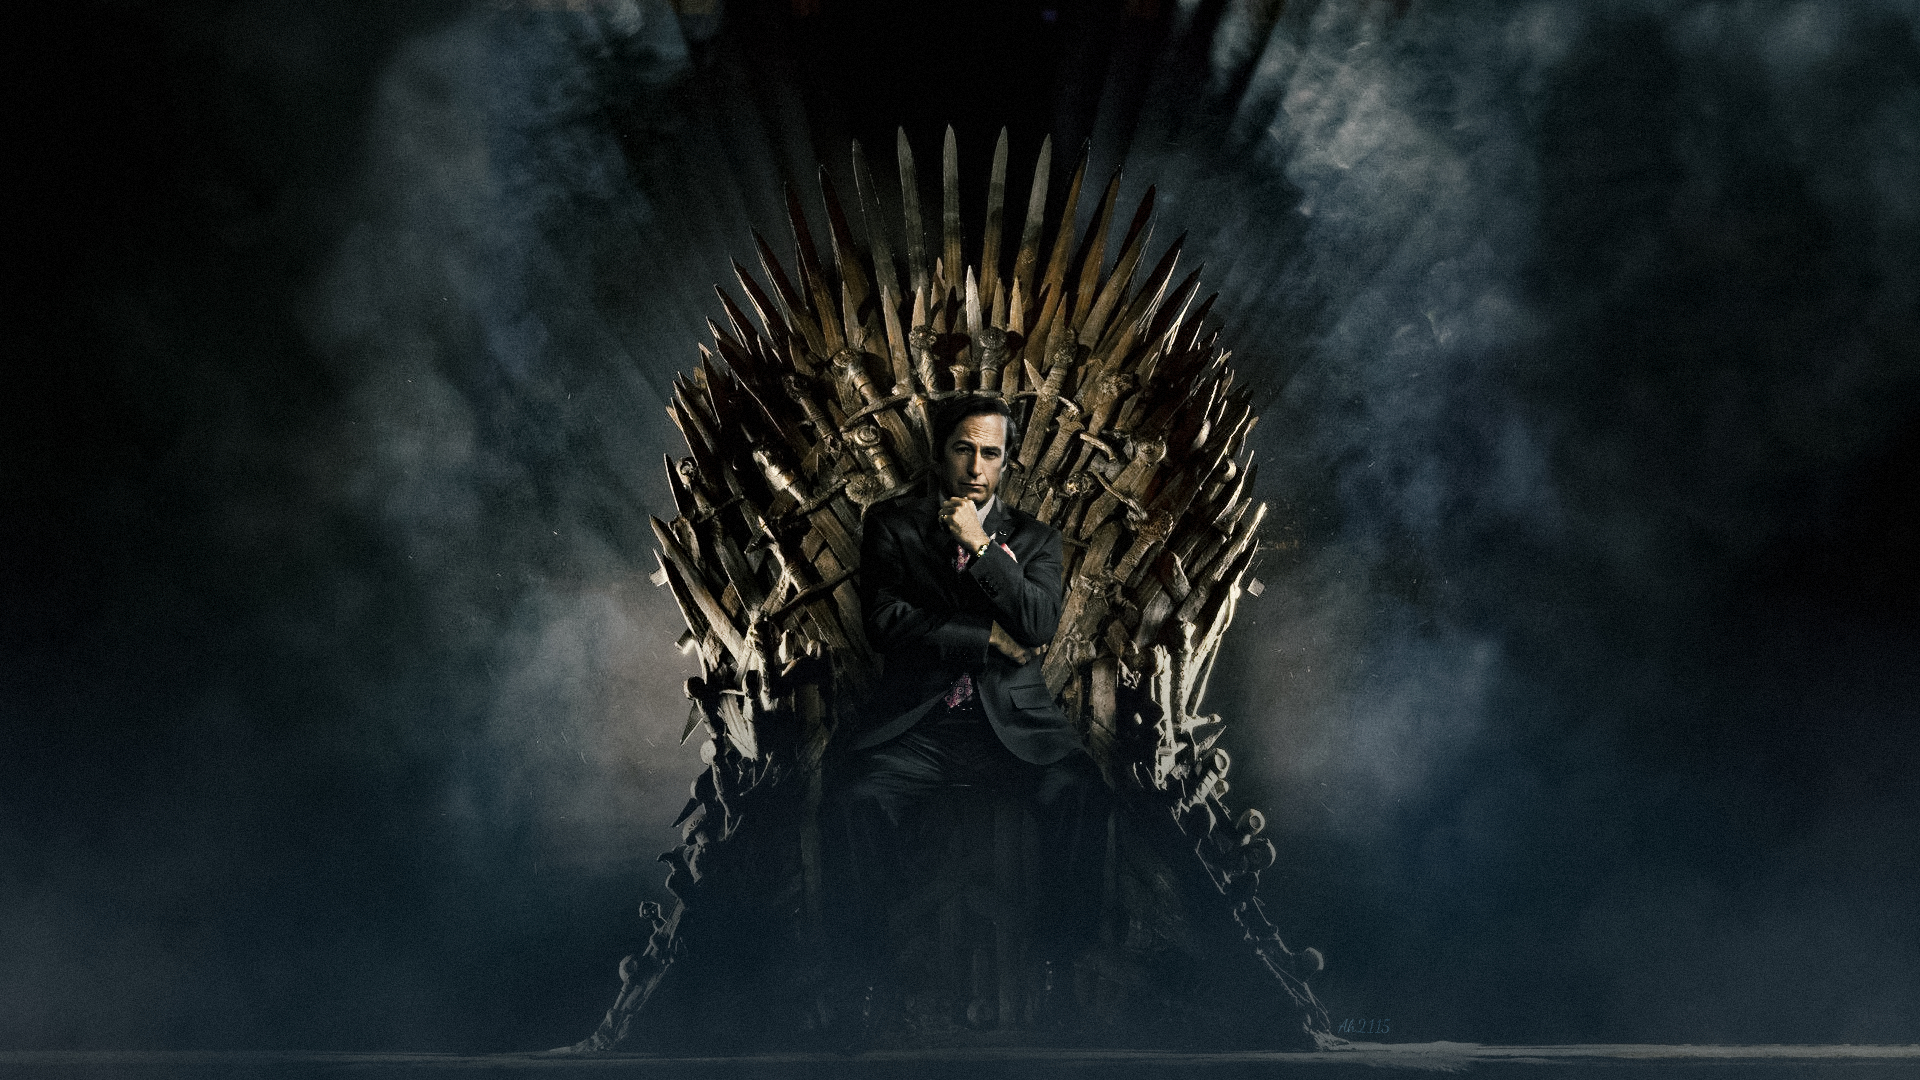 Free download Iron Throne Wallpaper 60 Group Wallpapers 800x800 for your  Desktop Mobile  Tablet  Explore 27 The Iron Throne Wallpaper  Iron  Throne Wallpaper Iron Man Wallpapers Iron Spider Wallpaper